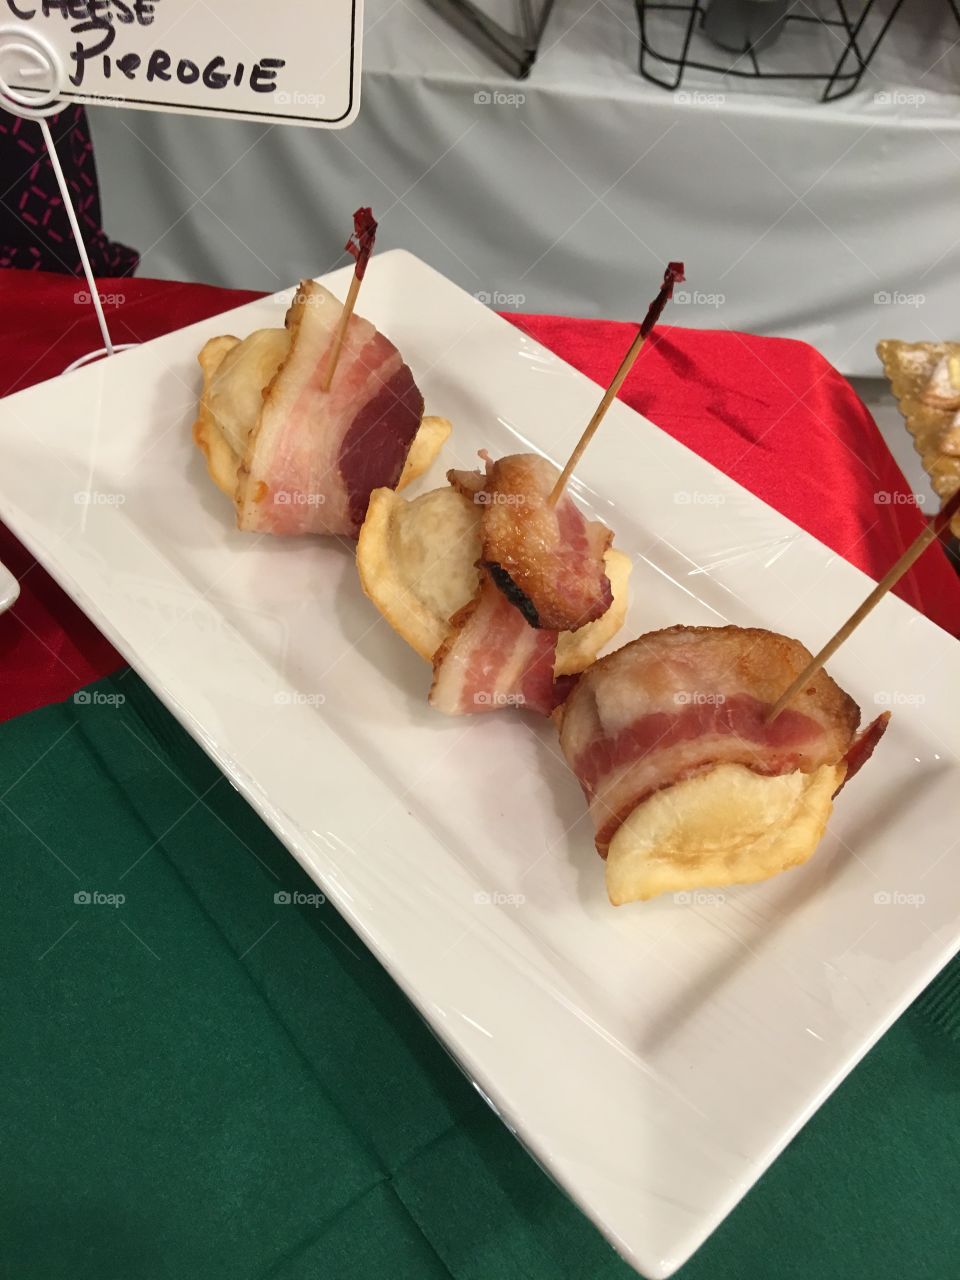 Bacon wrapped pirogies.   